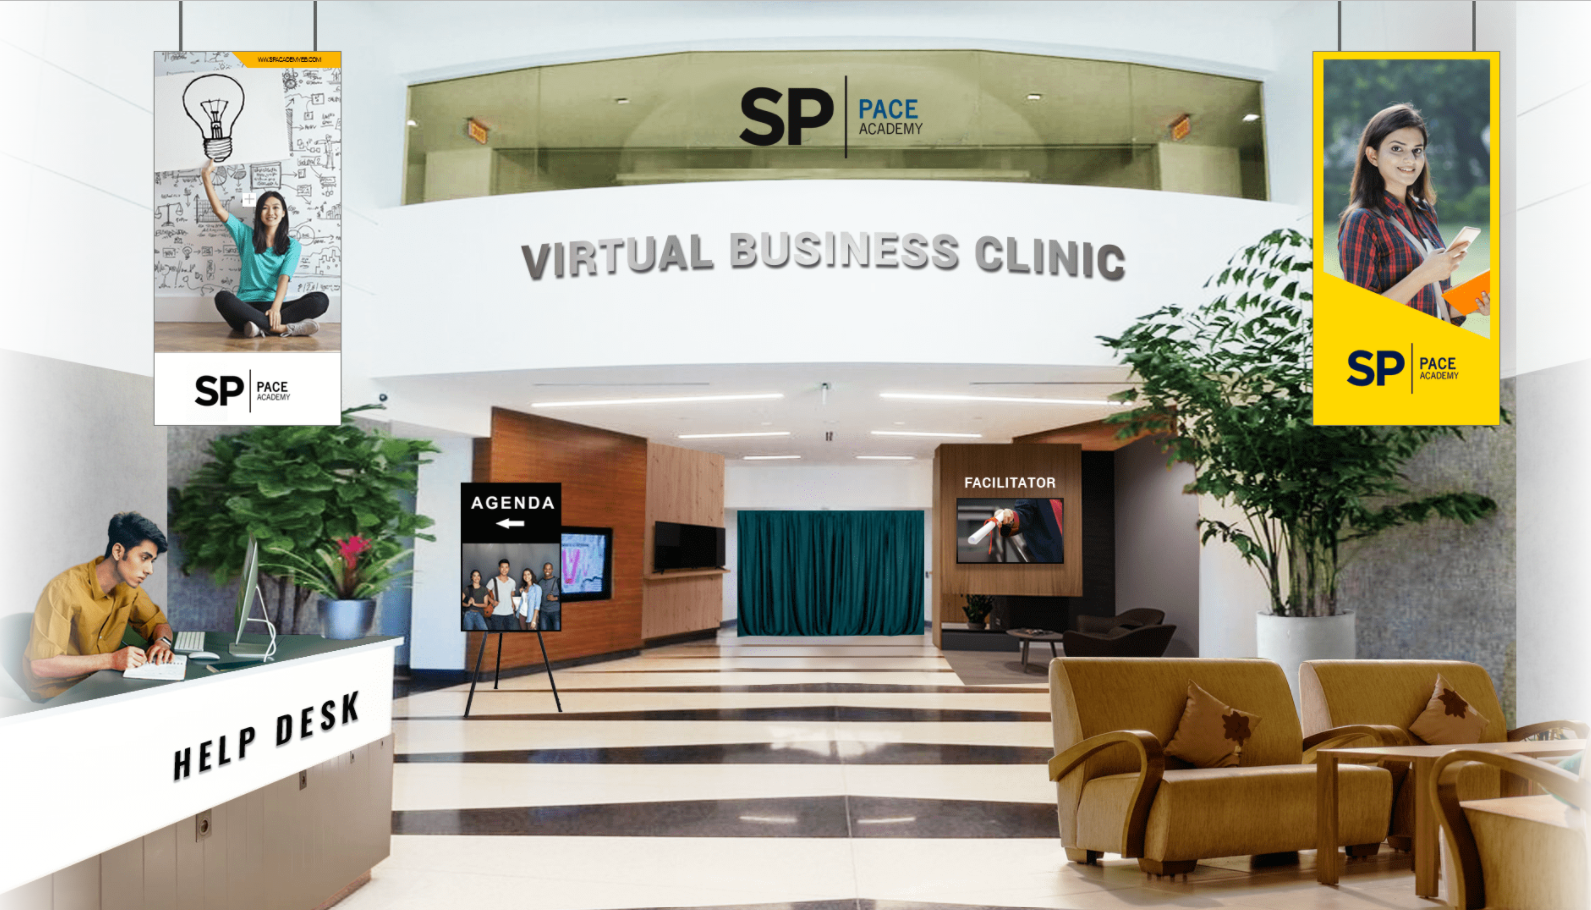 1-SP PACE Academy Virtual Business Clinic 2022